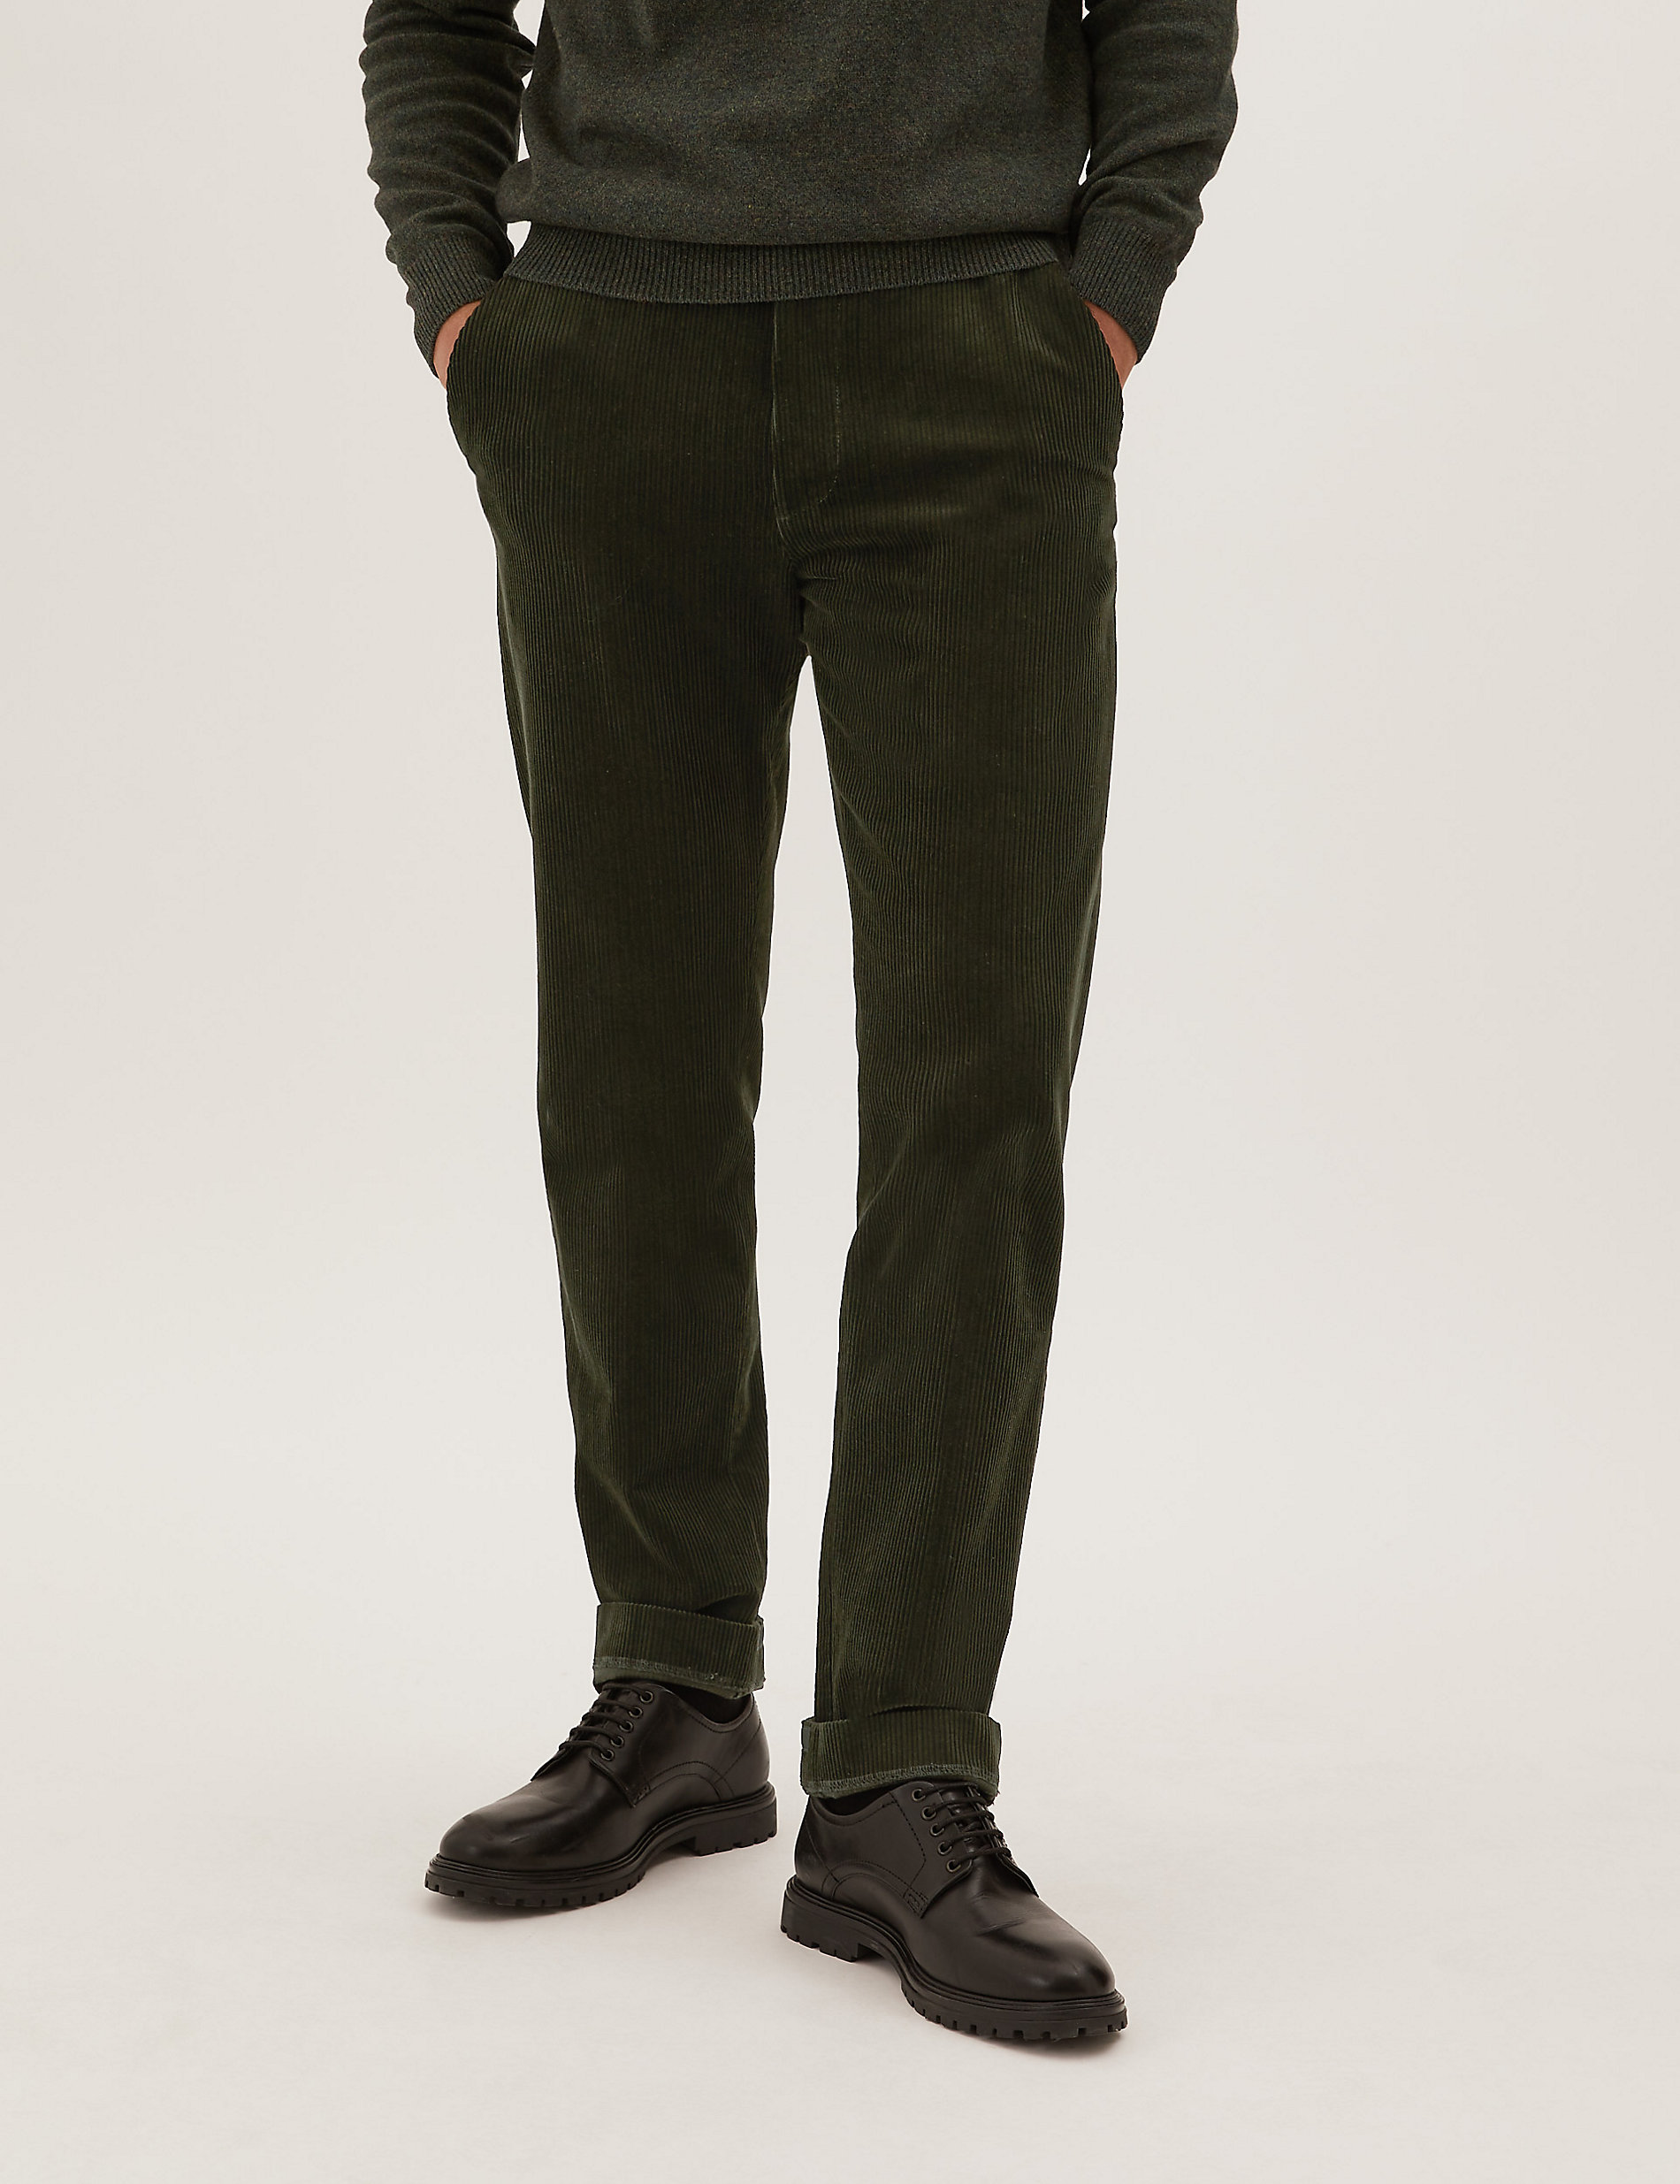 Regular Fit Luxury Corduroy Stretch Trousers